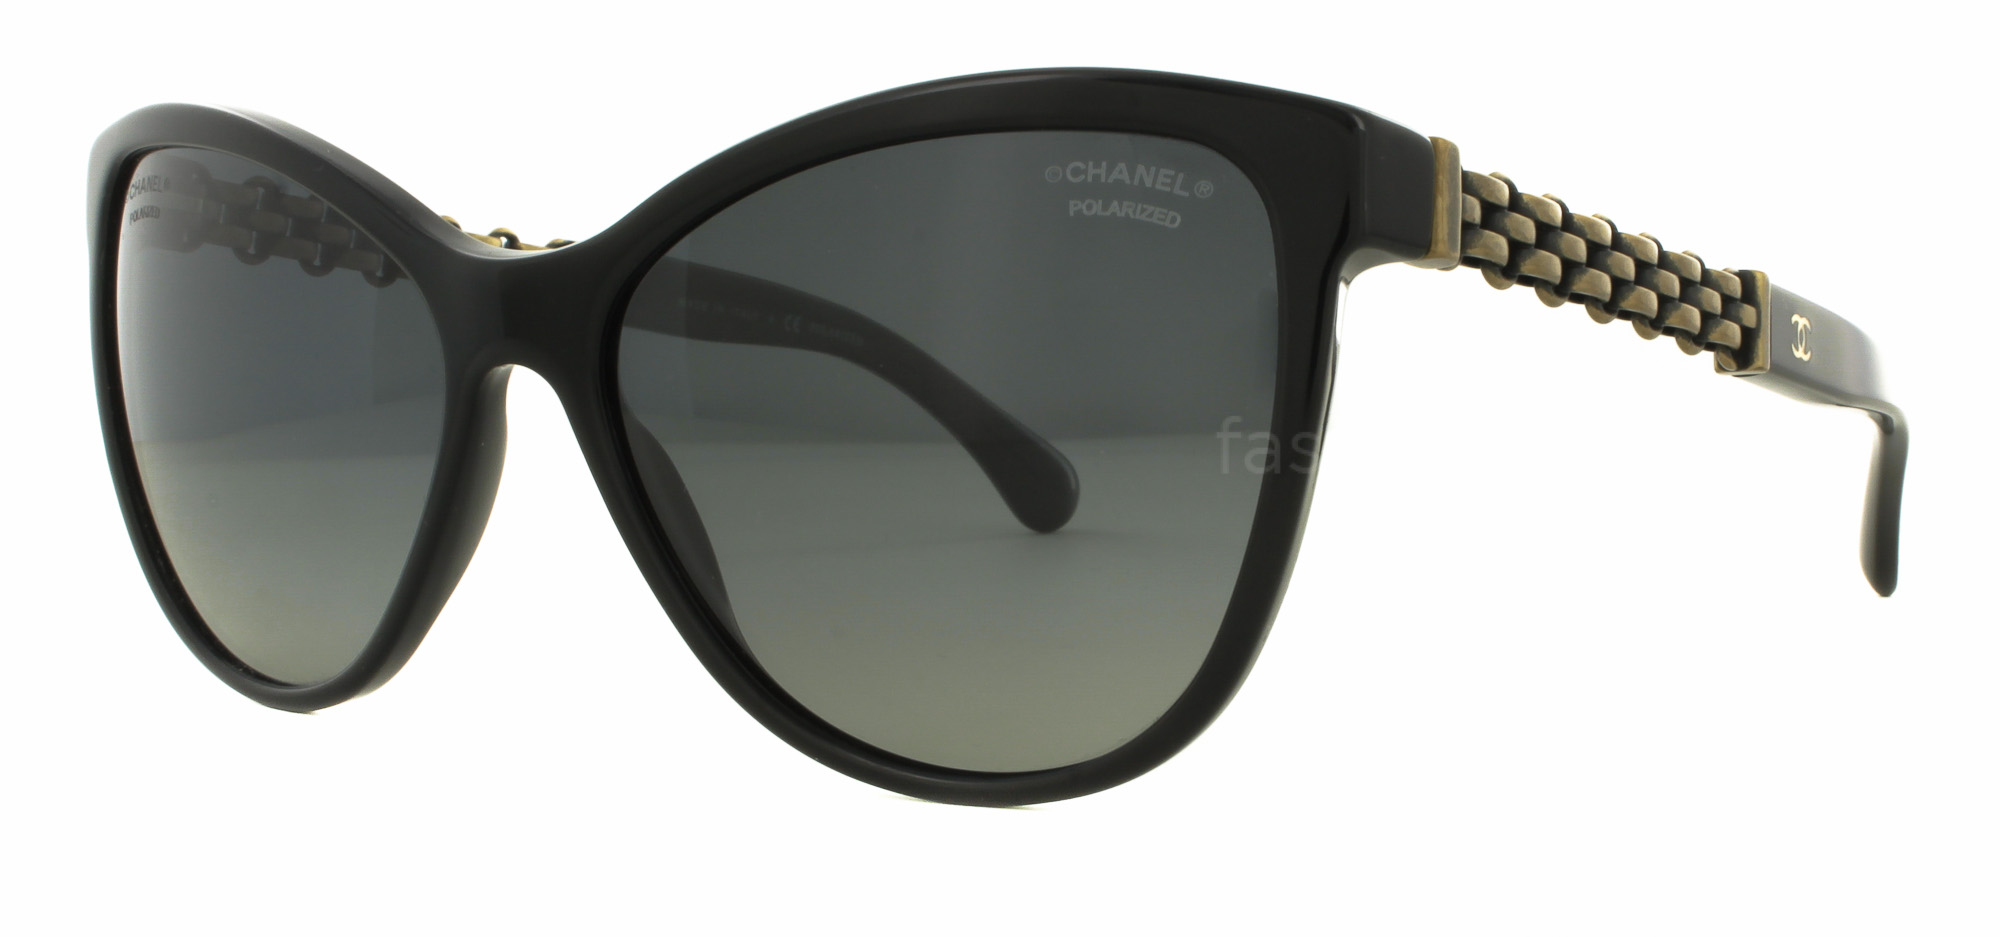 CHANEL 5326 501S8